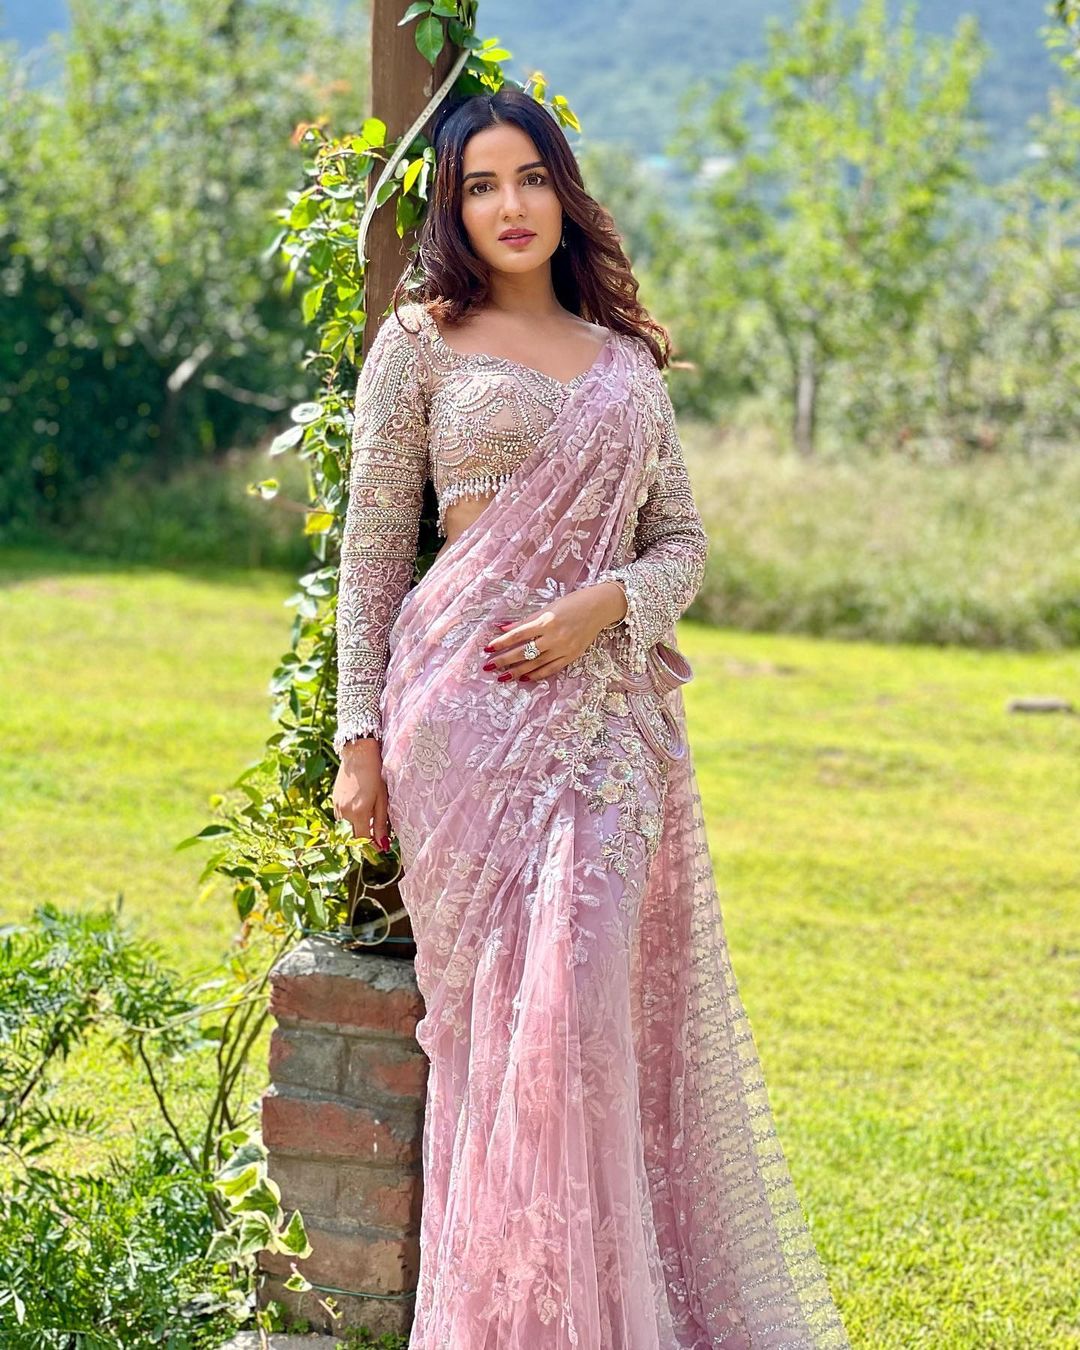 Jasmin Bhasin Is A Vision To Behold In Transparent Lavender Saree, Check  Out The TV Diva's Most Gorgeous Saree Moments